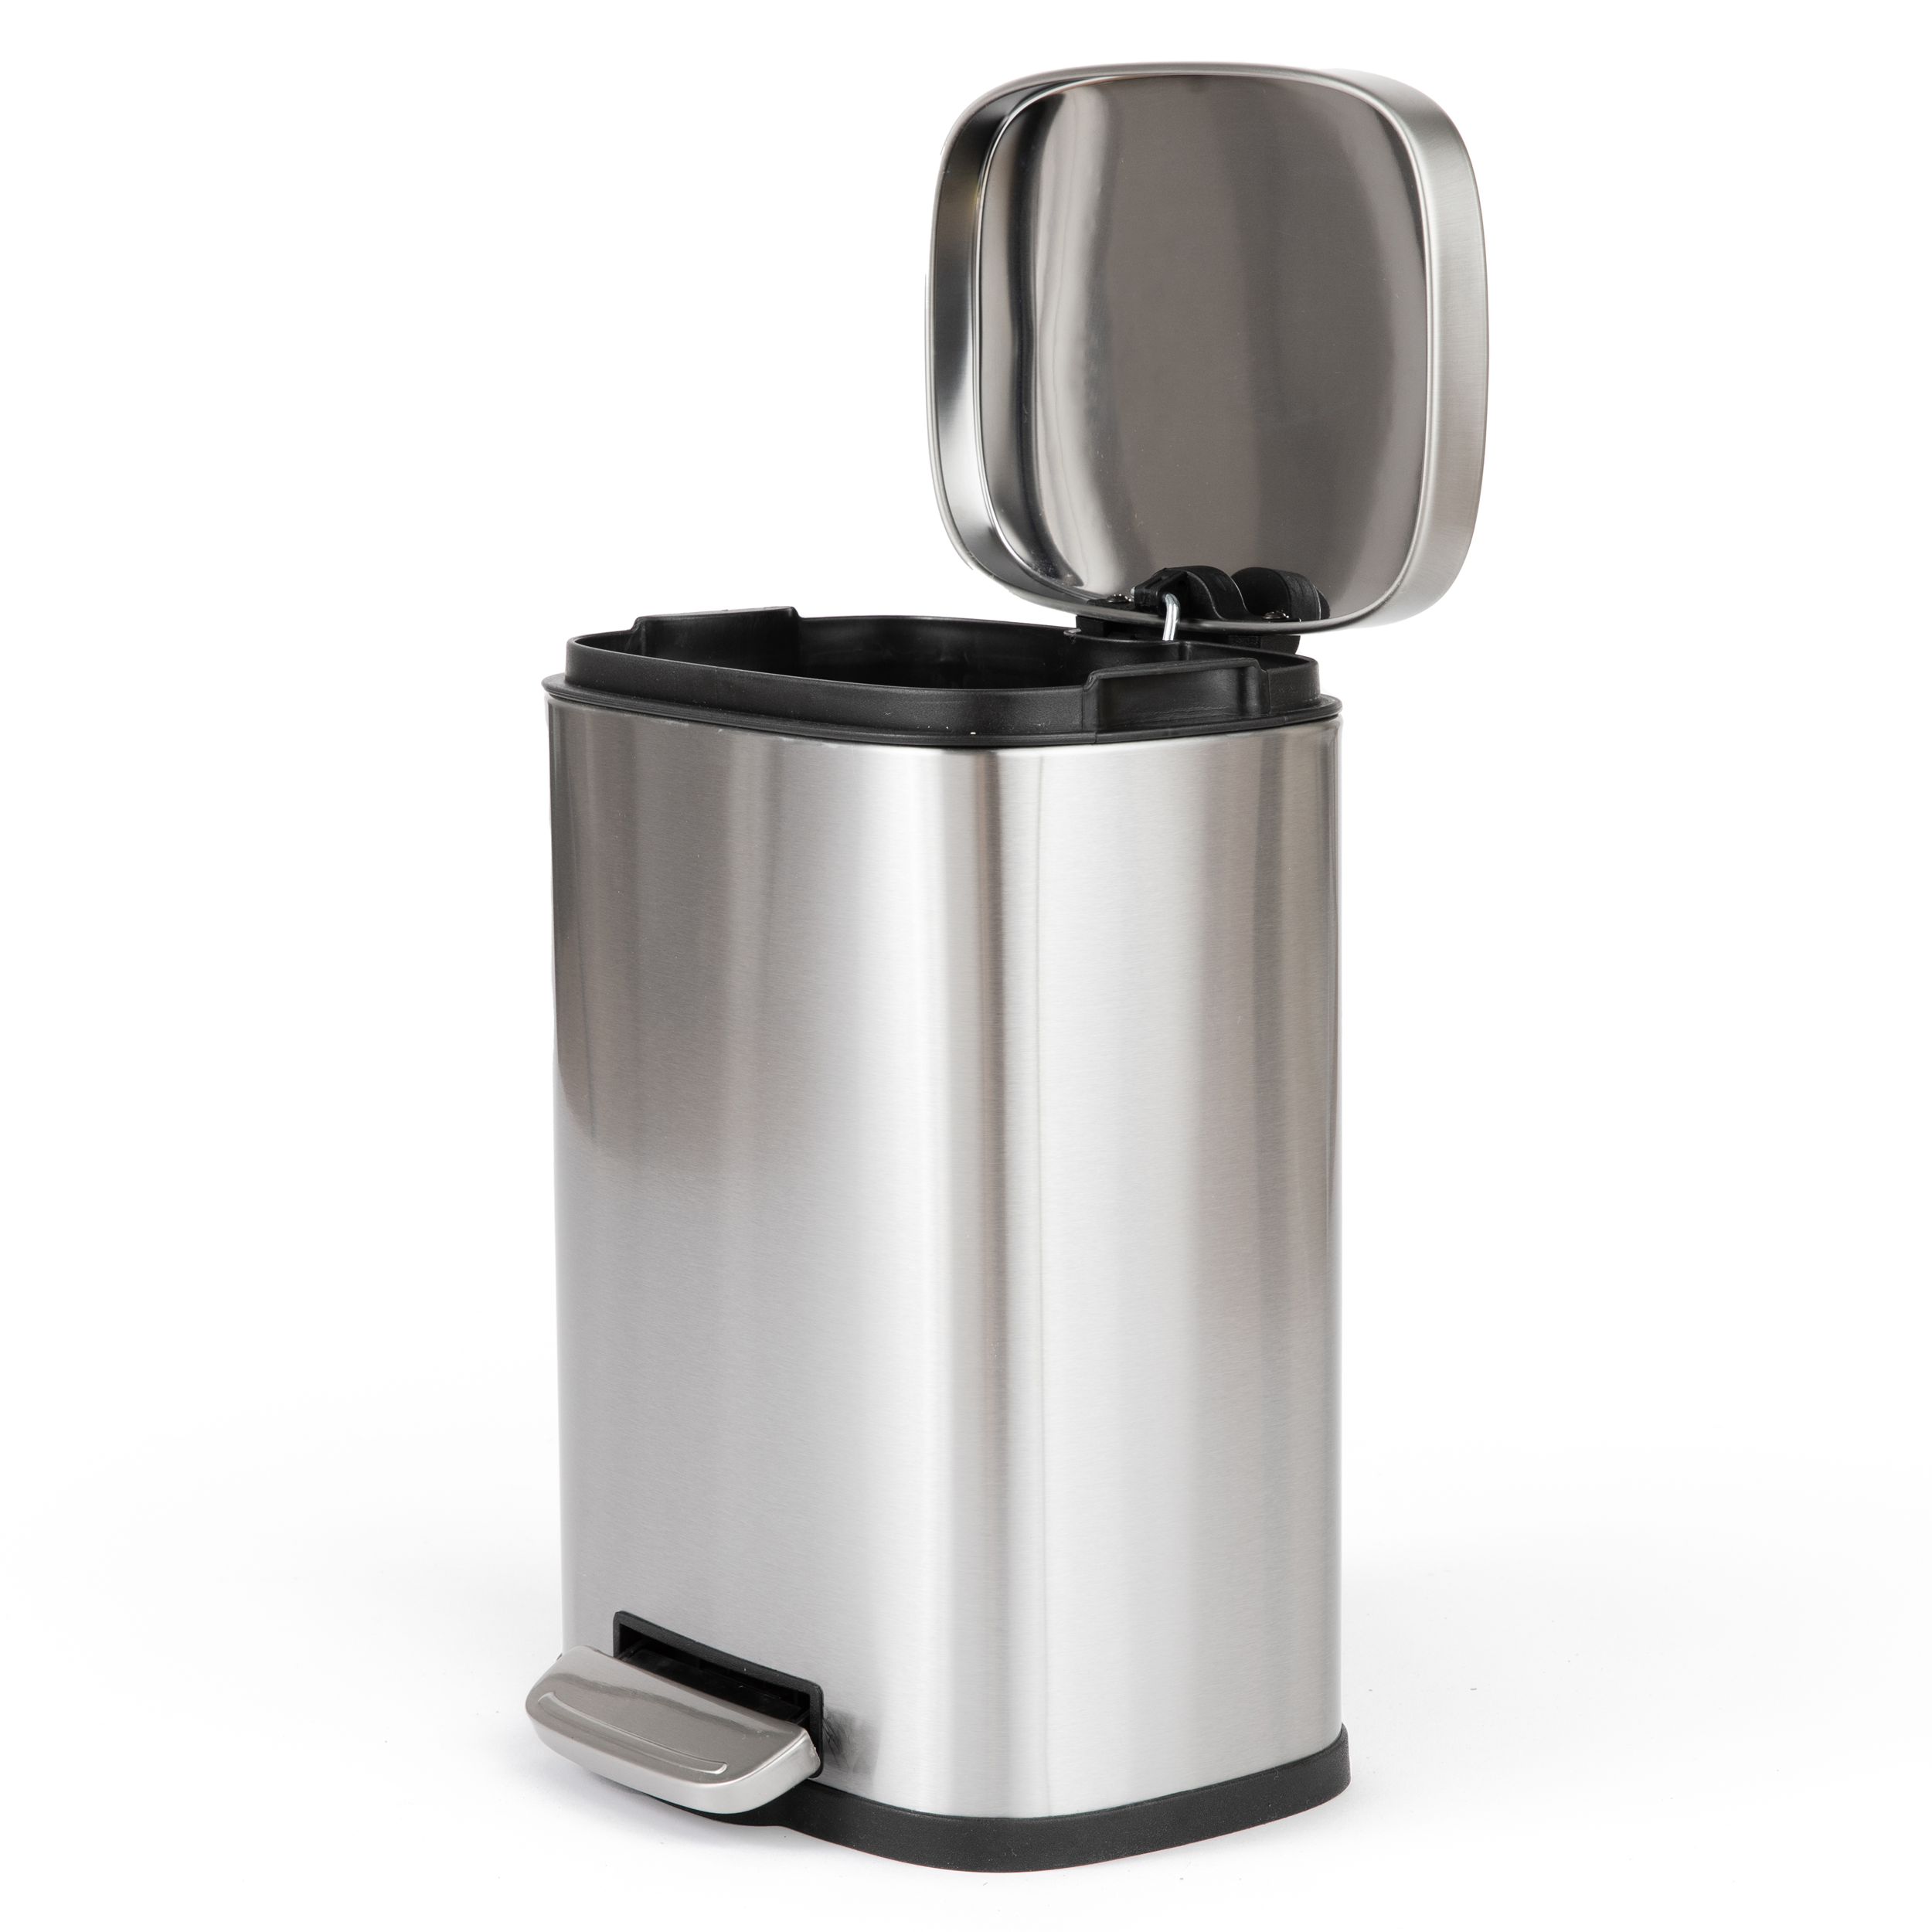 Rectangular, Stainless Steel, Soft-Close, Step Trash Can, 30 Liter